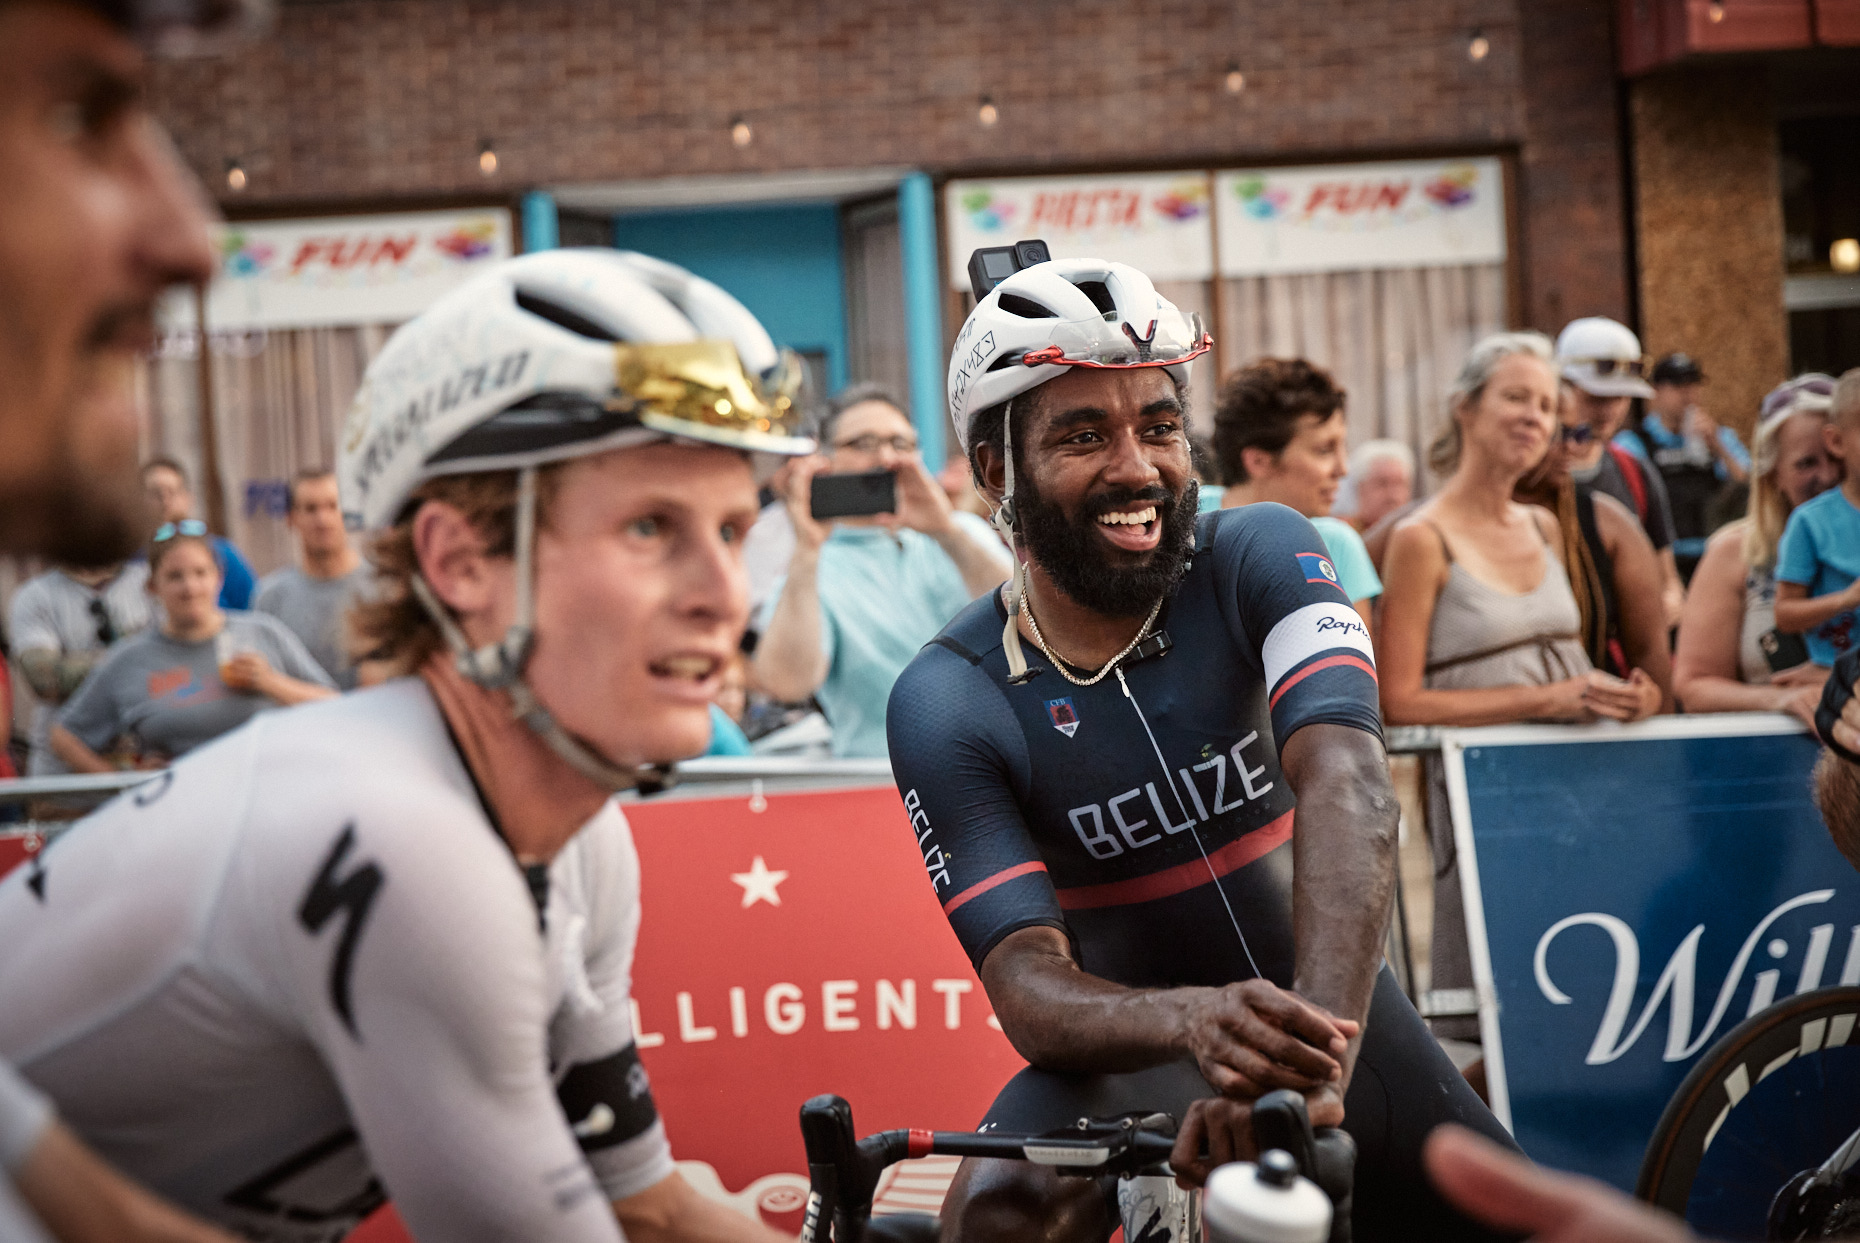 Bicycle races at the finish line | Sports and Lifestyle photography by Saverio Truglia